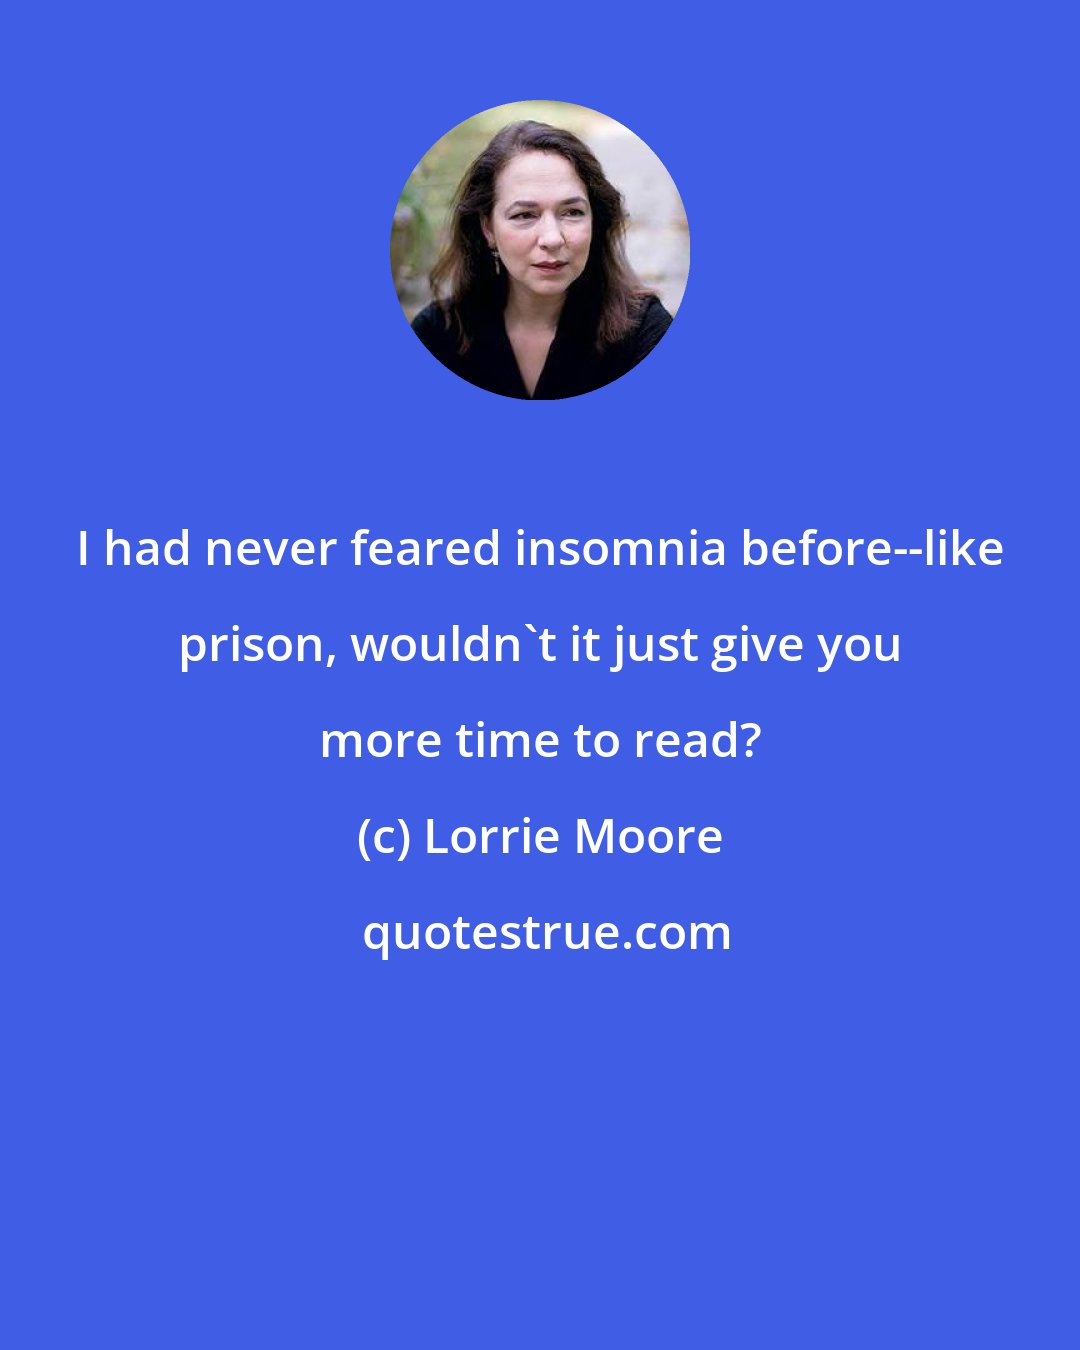 Lorrie Moore: I had never feared insomnia before--like prison, wouldn't it just give you more time to read?